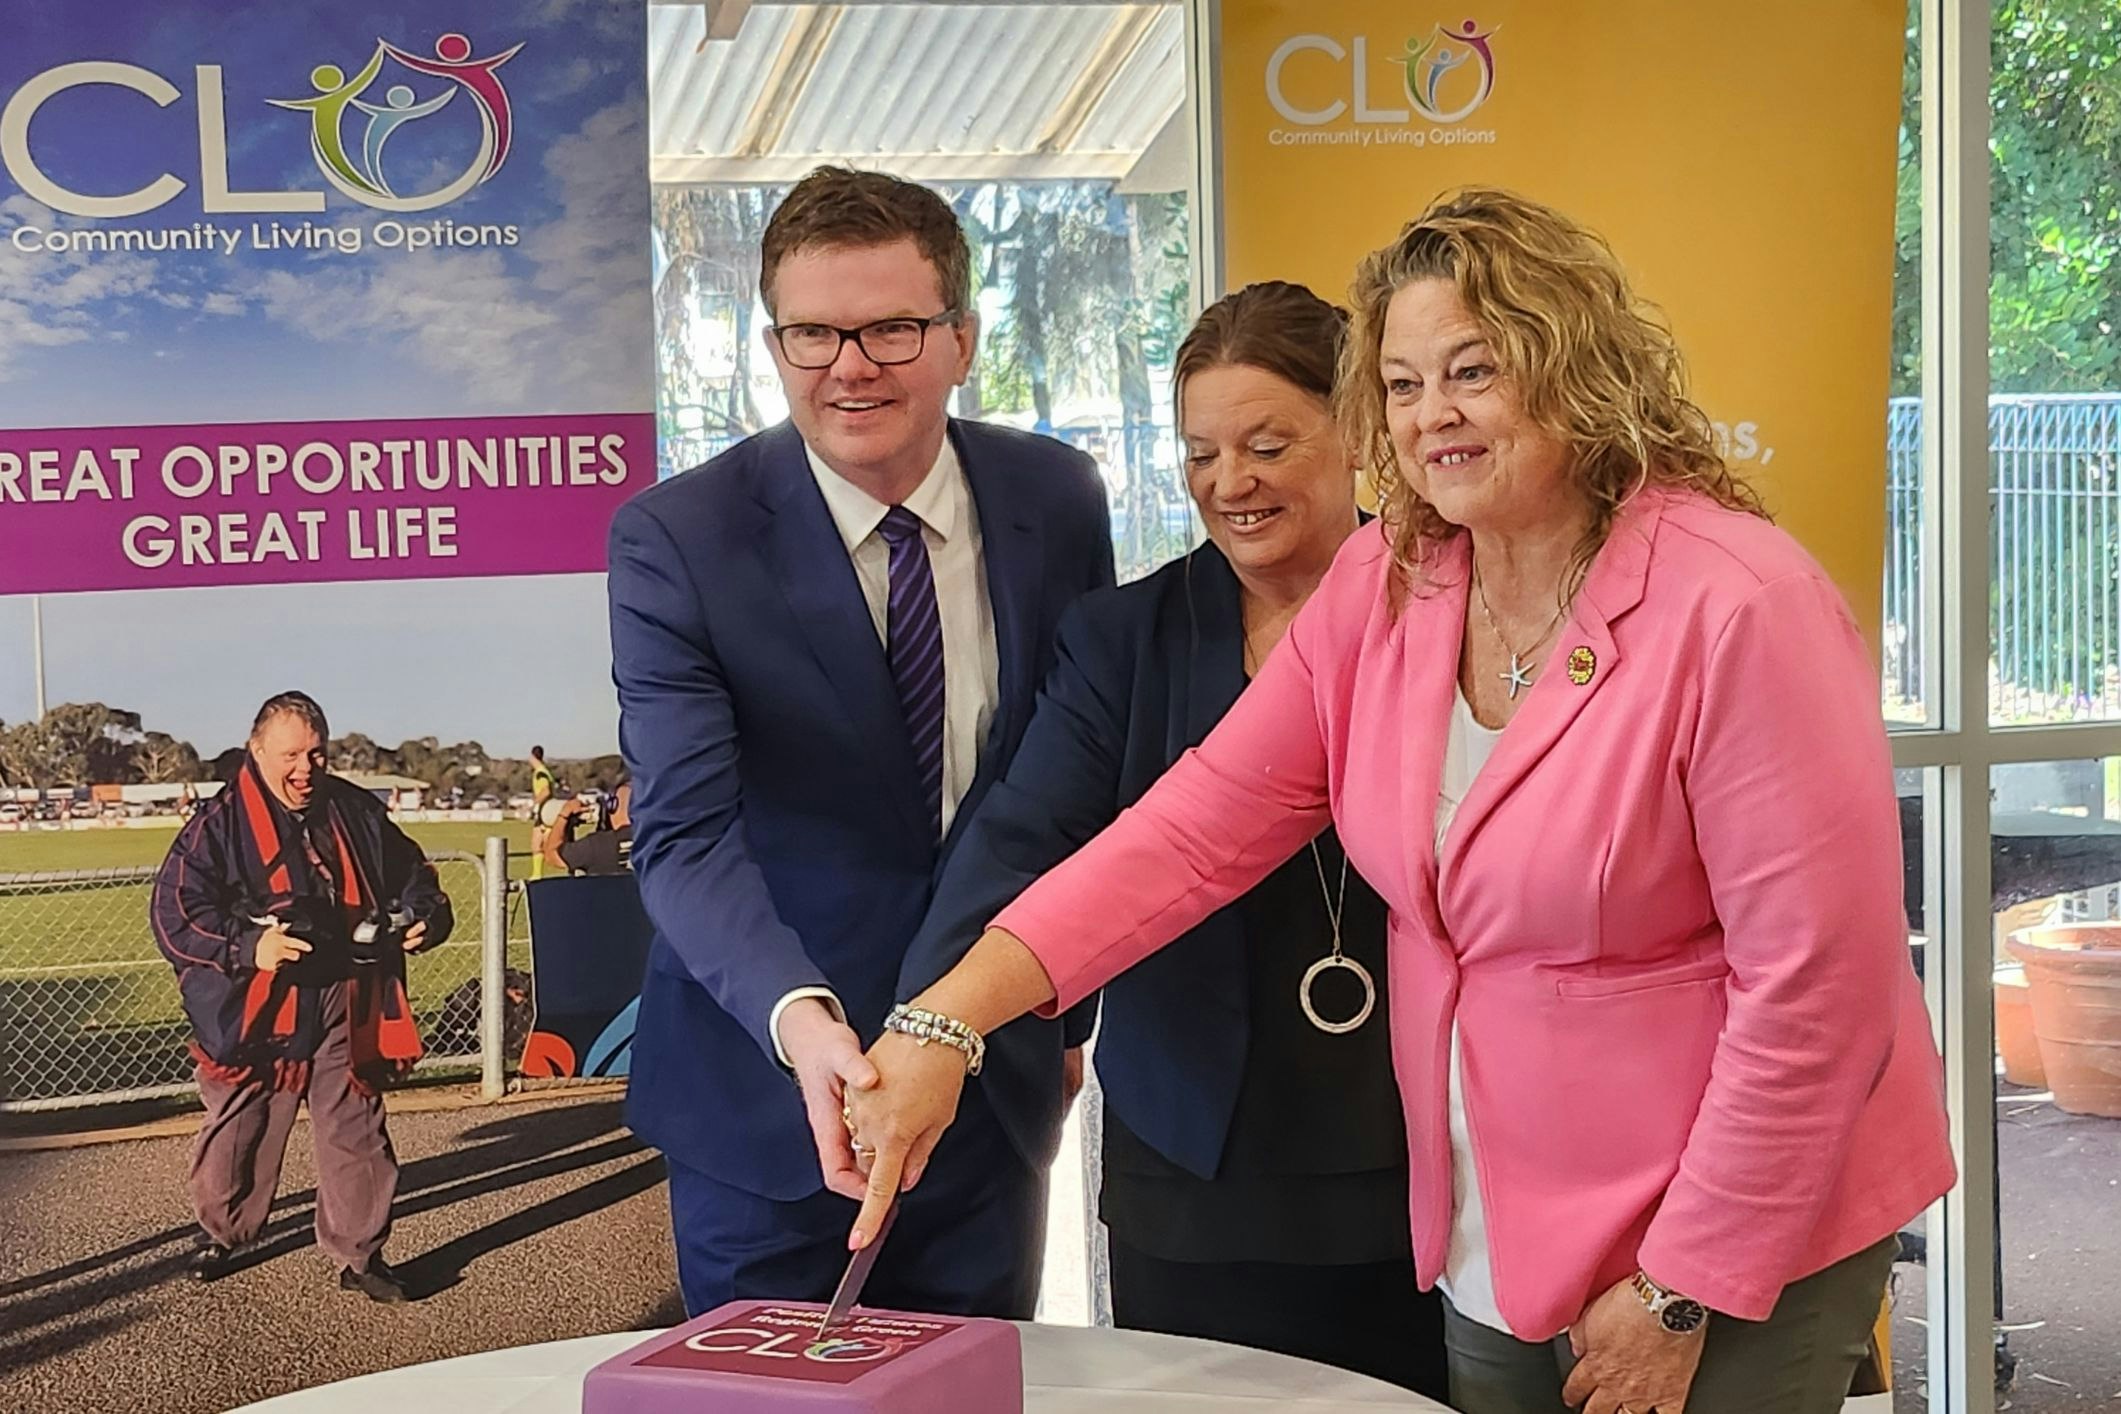 <p>Minister for Health and Well-being Chirs Picton MP [left], Minister for Human Services Nat Cook MP [right] and Community Living Options CEO Mel Kubisa [centre] cut the commemorative cake on Friday morning. [Source: Disability Support Guide]</p>
